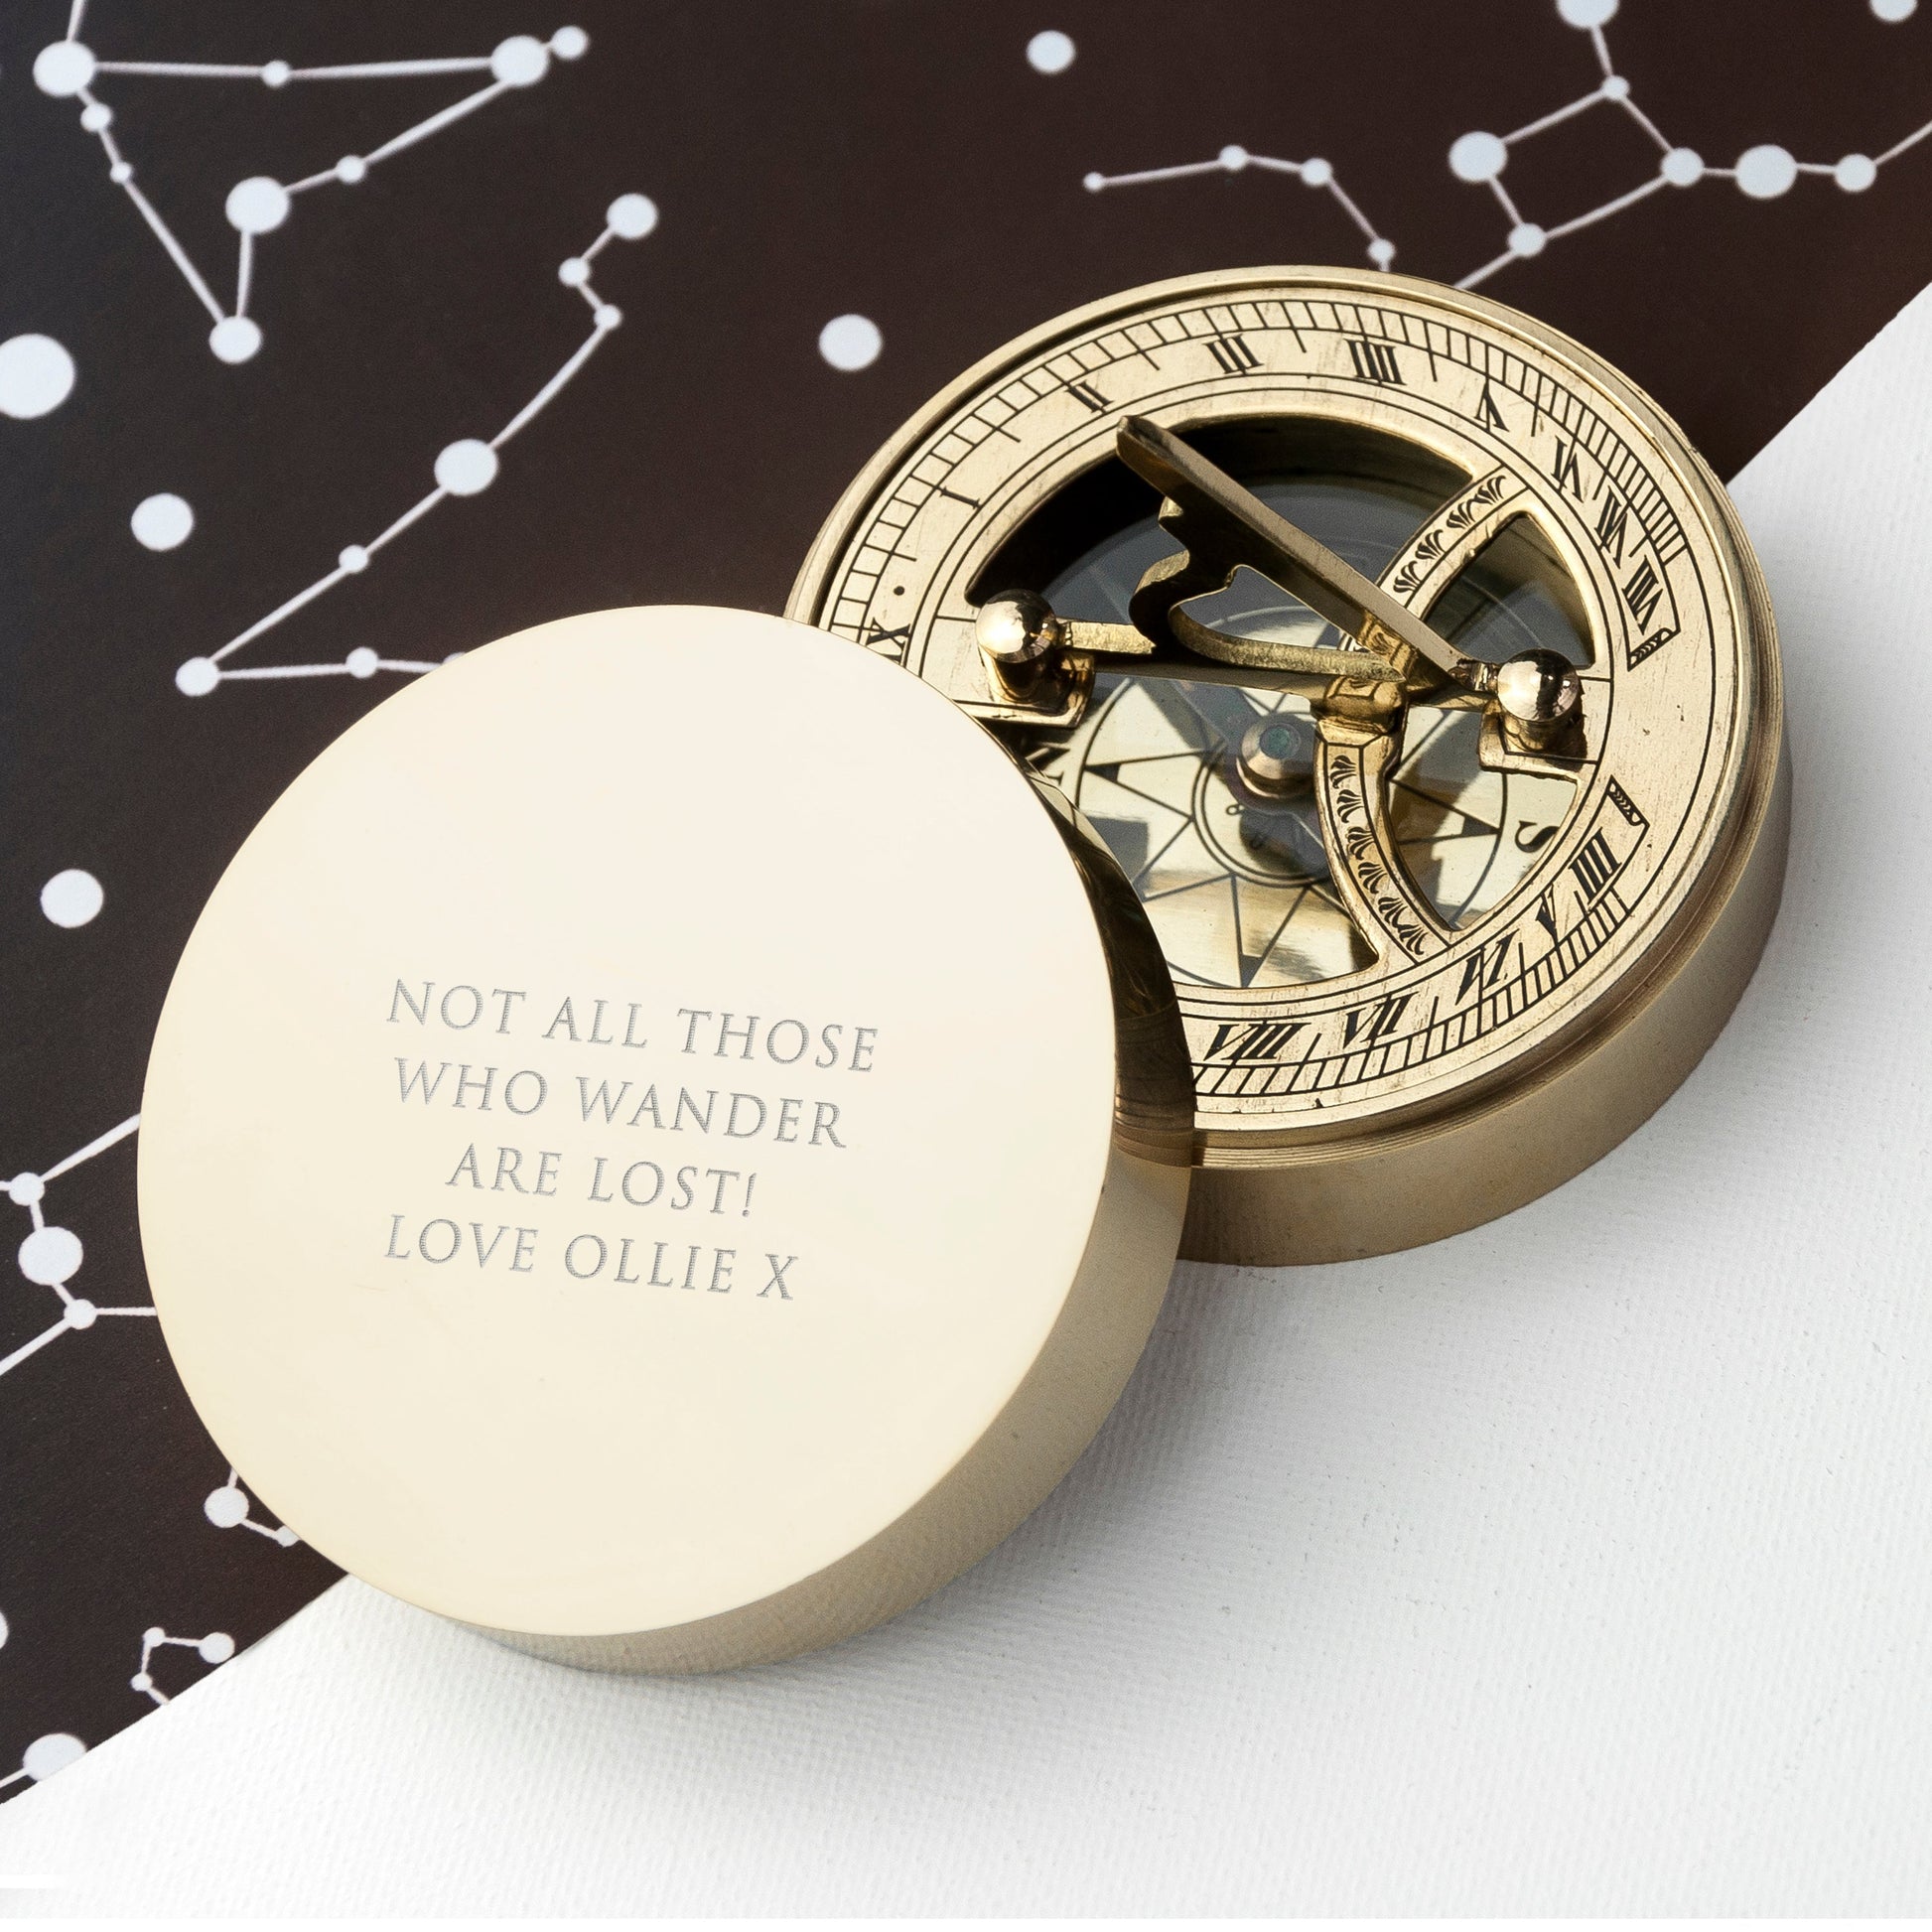 Personalized Keepsakes - Personalized Adventurer's Brass Sundial and Compass 